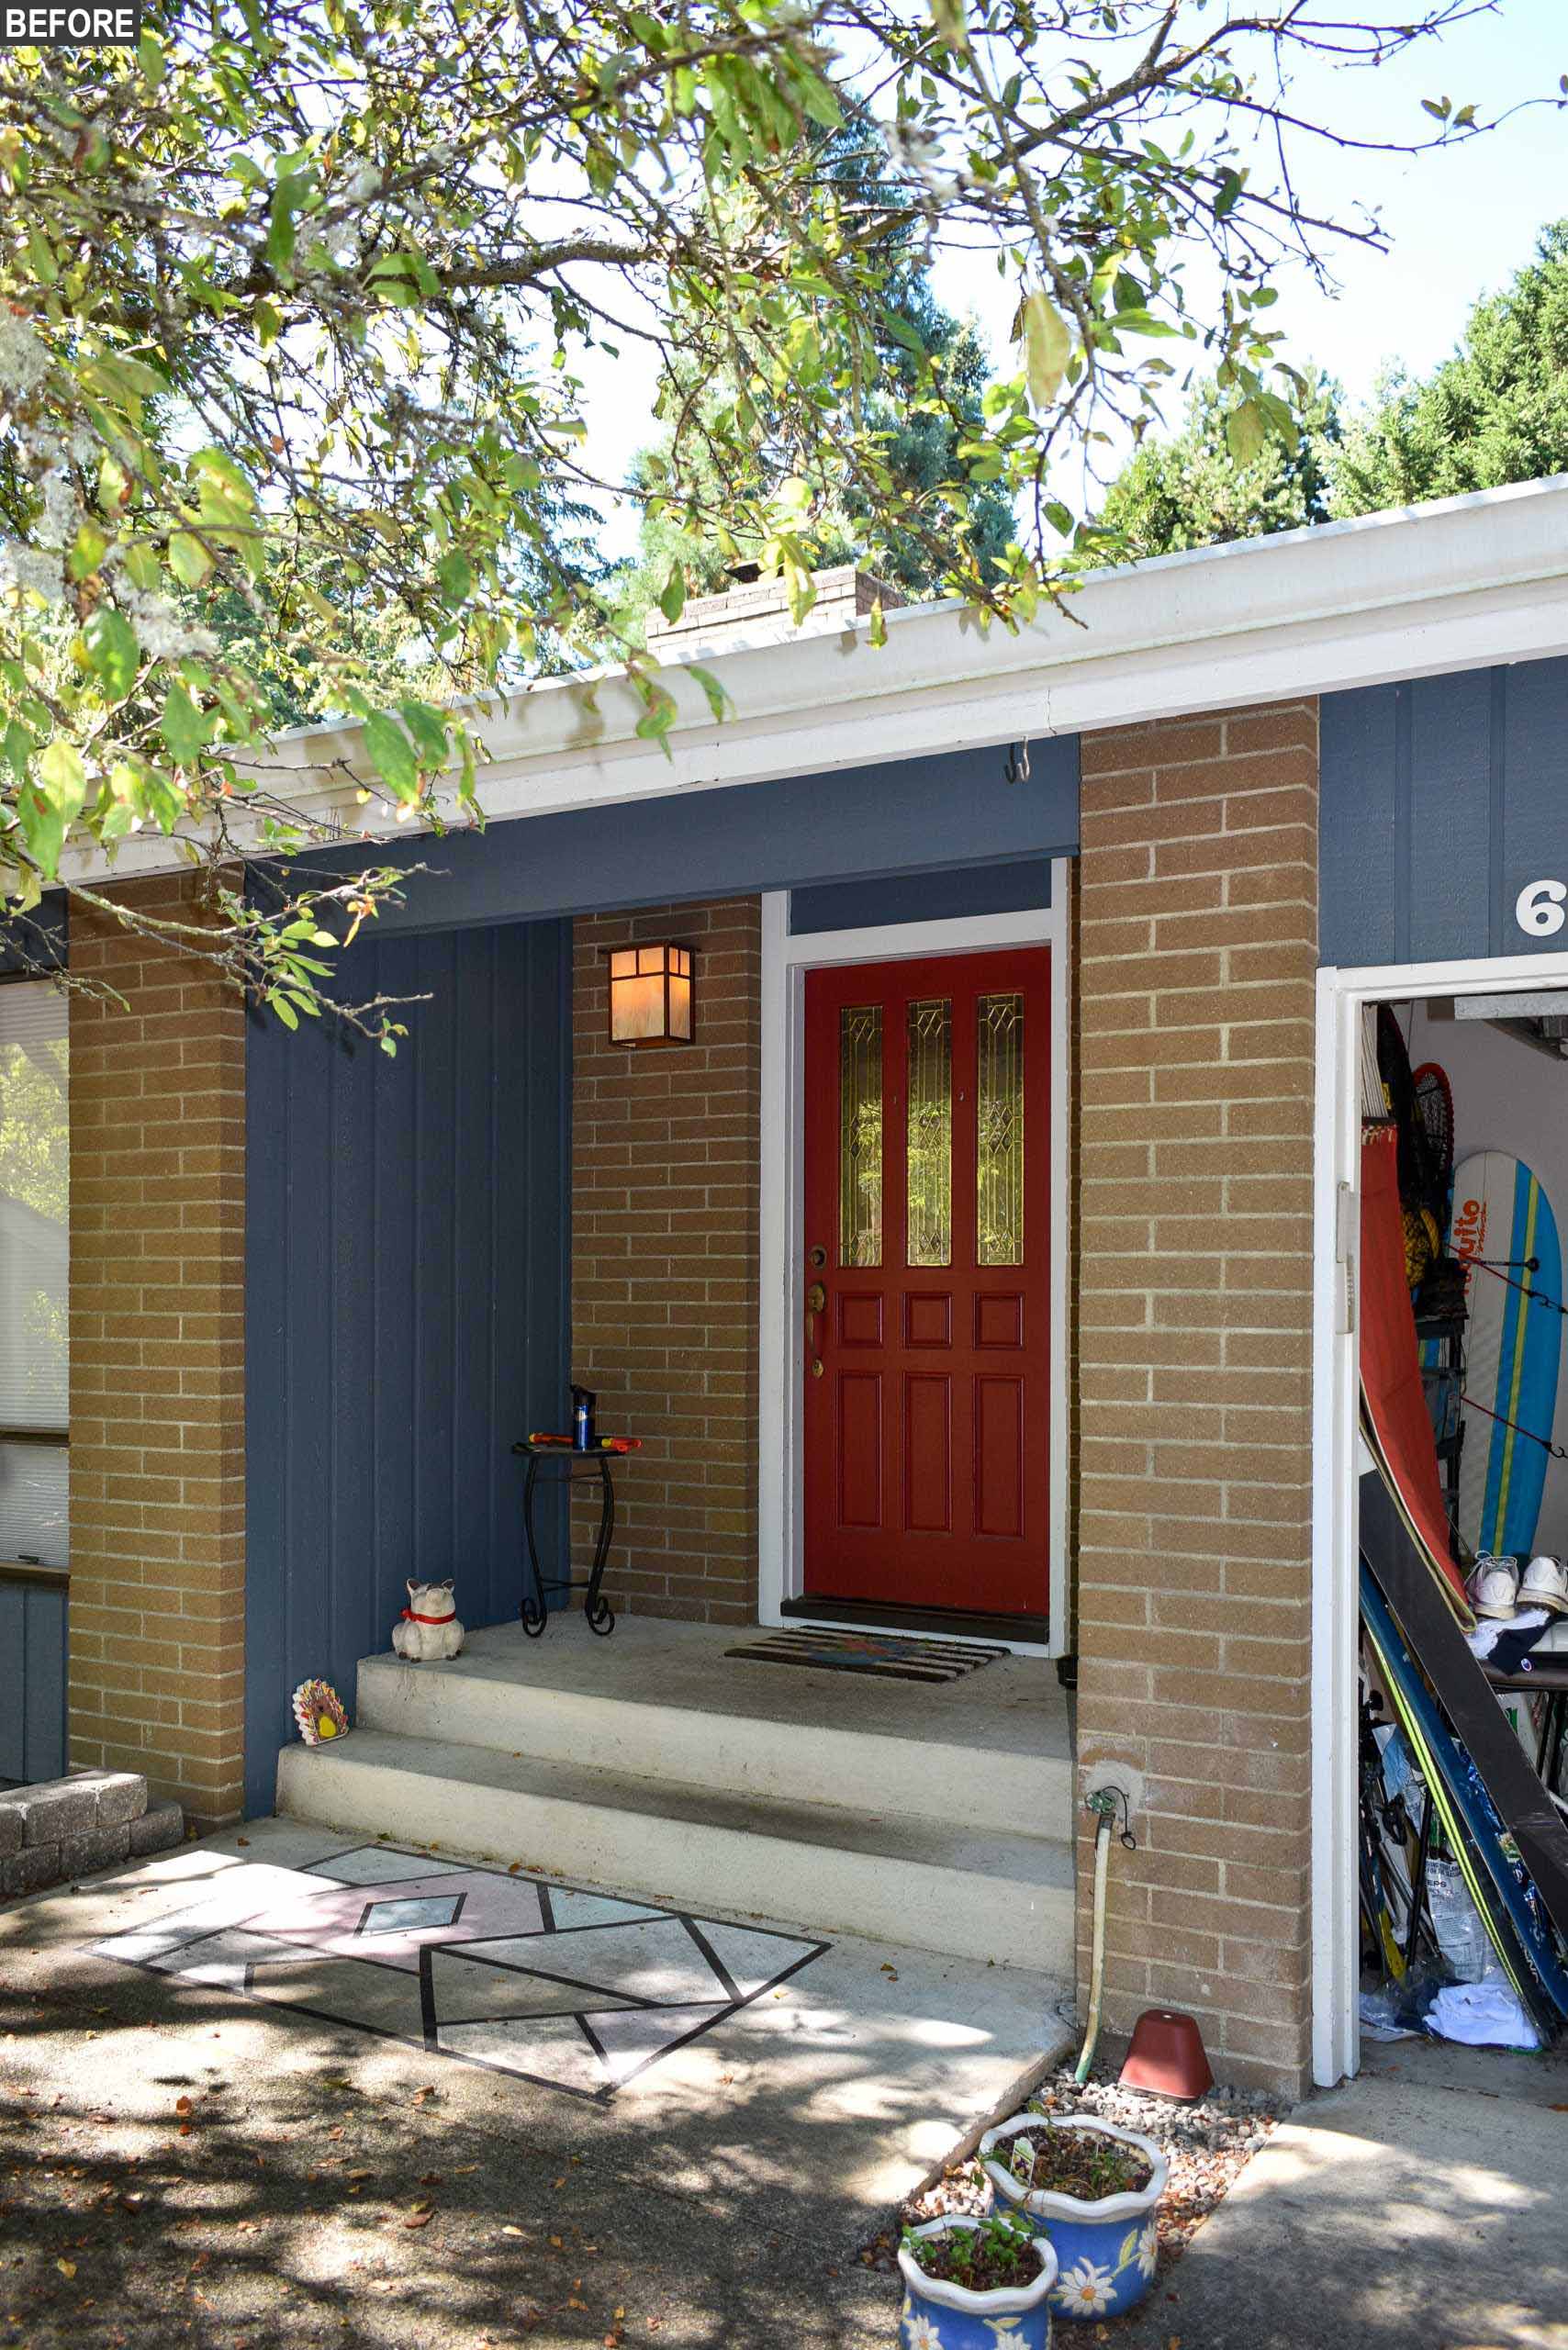 Before remodel - The original entryway had blue vertical siding, concrete steps, and a red front door.